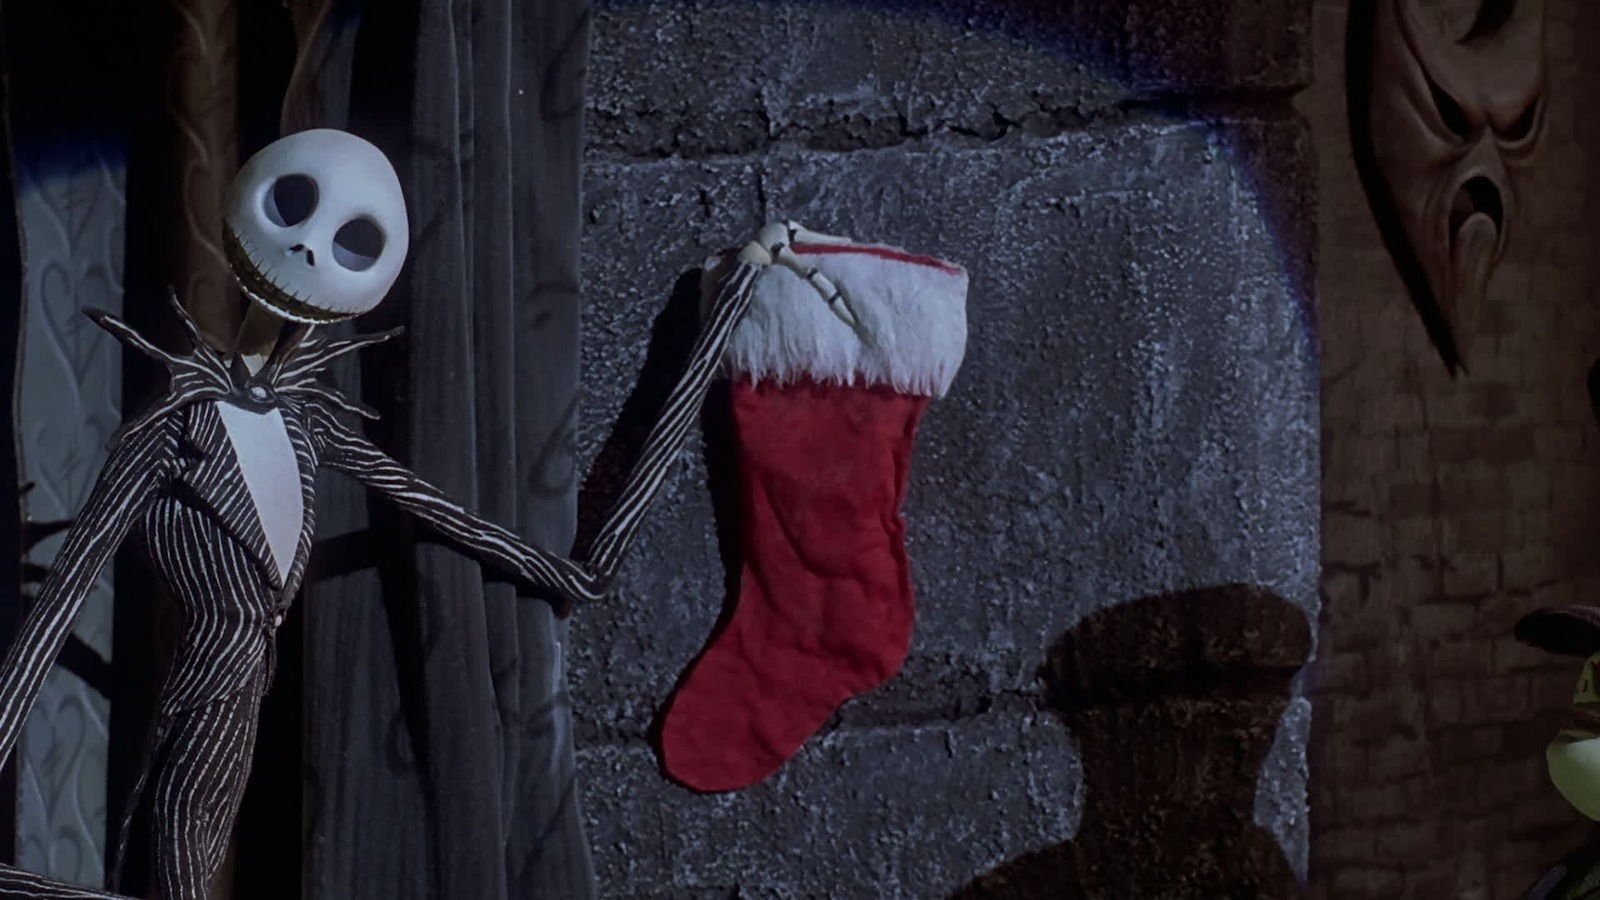 The Nightmare Before Christmas Wasn't Exactly The Film Disney Expected